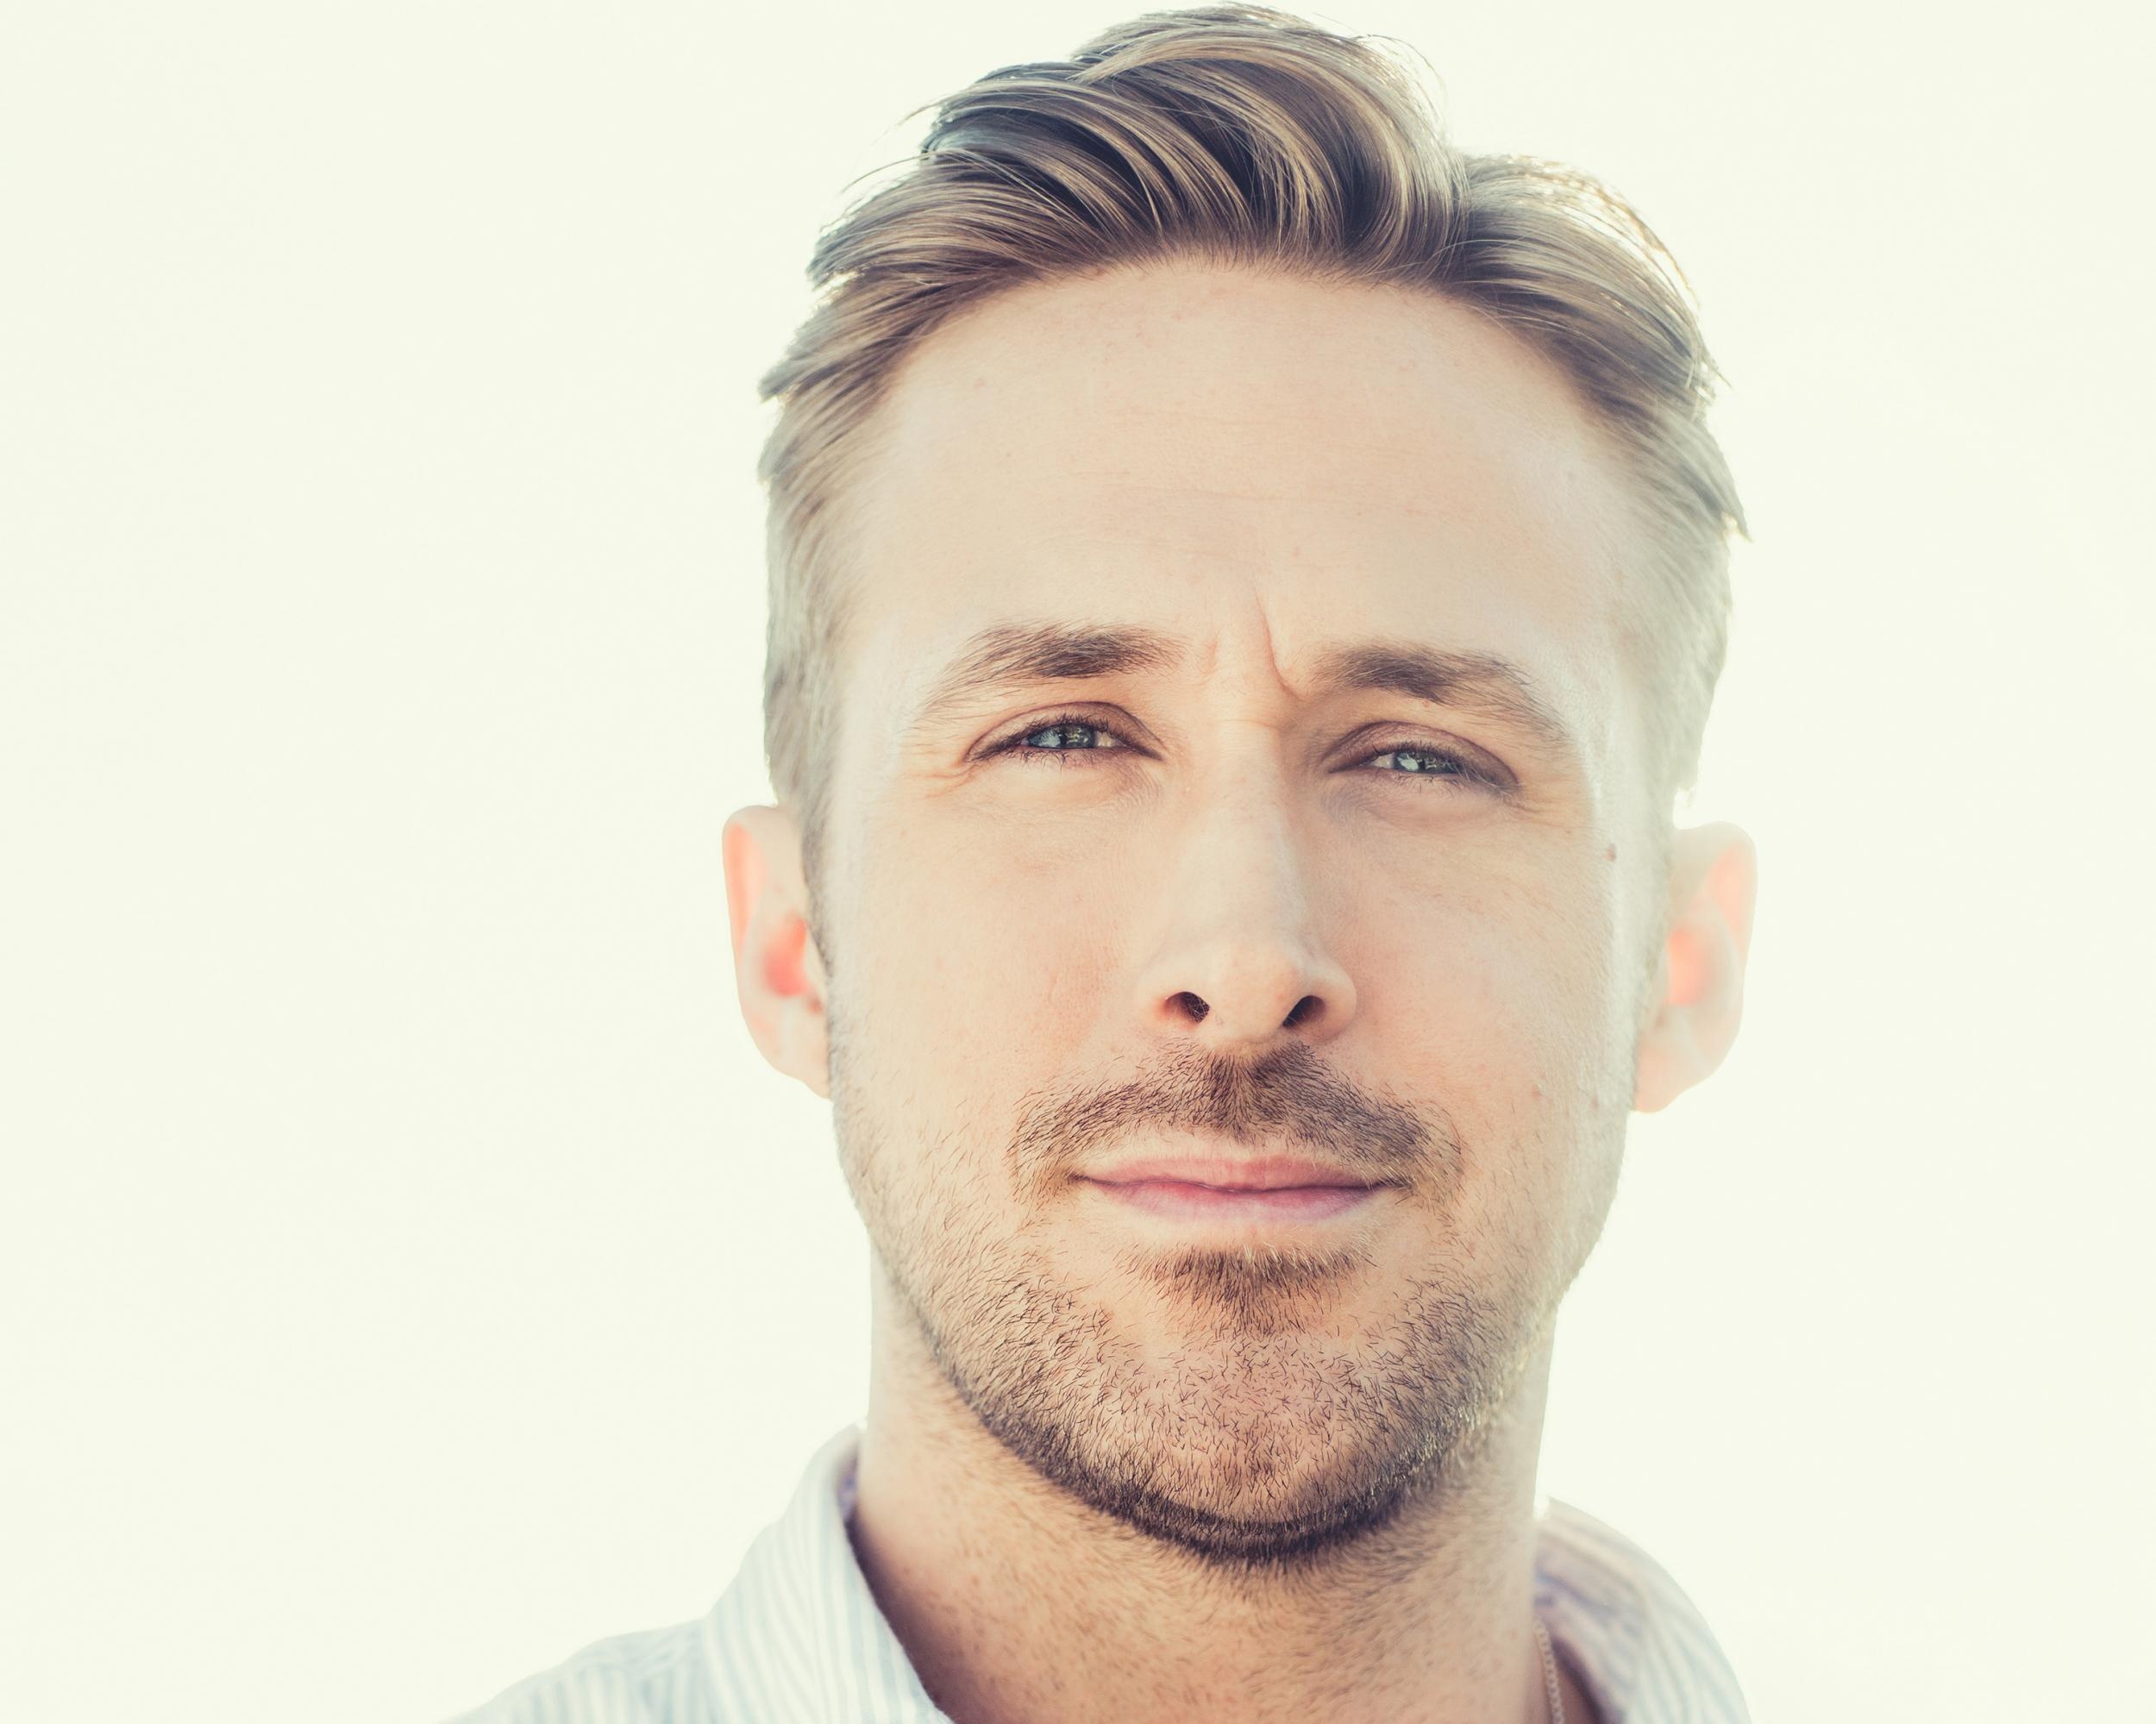 Ryan Gosling: Portrayed Stephen Meyers in a 2011 political drama film, The Ides of March. 2500x2000 HD Wallpaper.